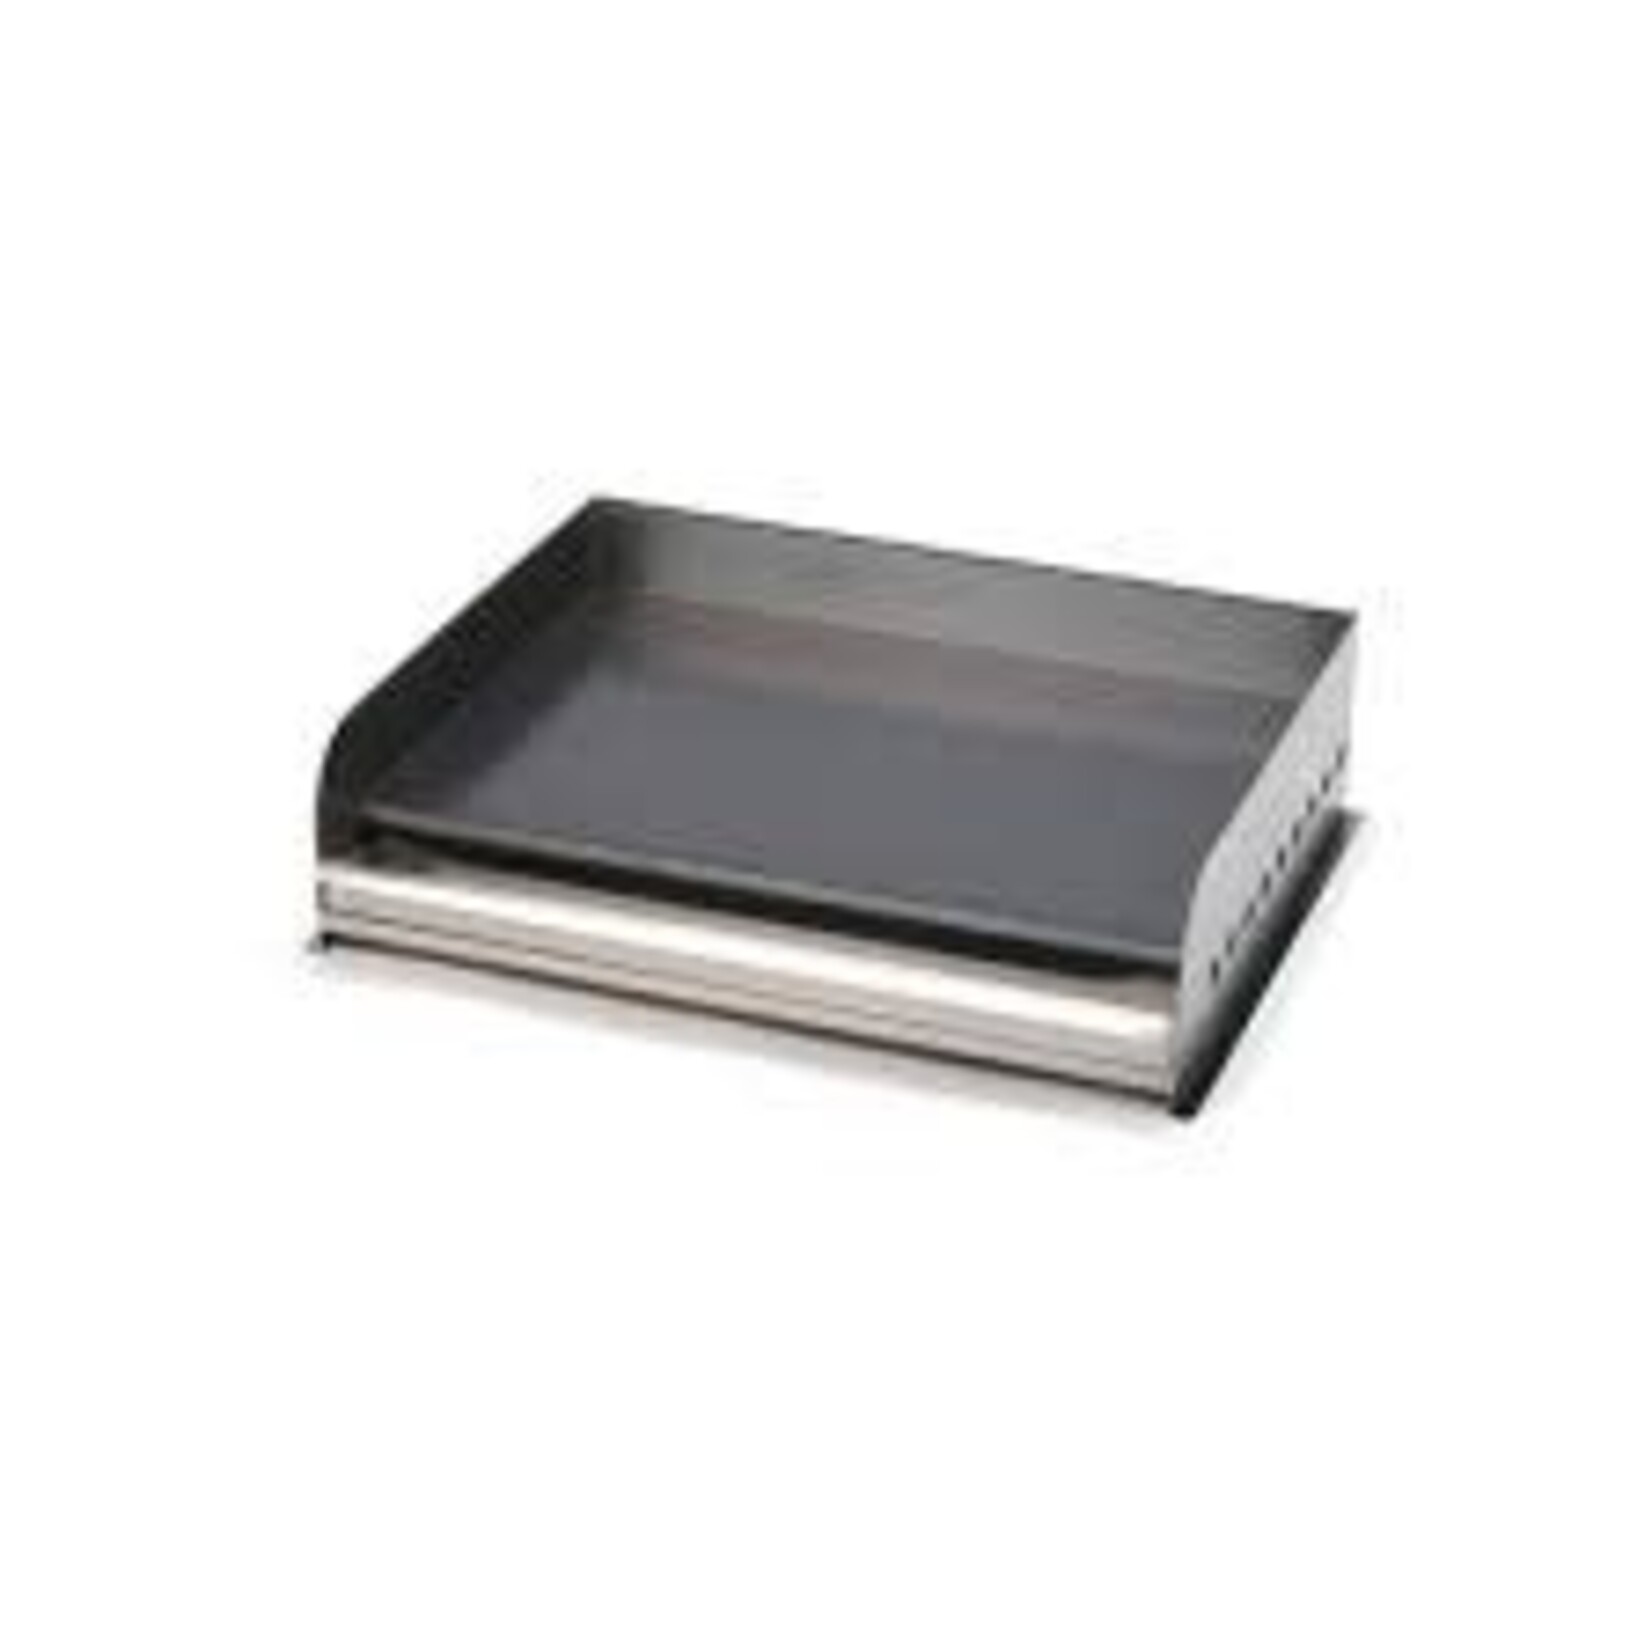 Crown Verity IPGRID48 - FLAT TOP GRIDDLE, 48" COMES WITH GRIDDLE TOP AND THERMOMETER (Infinite Only)